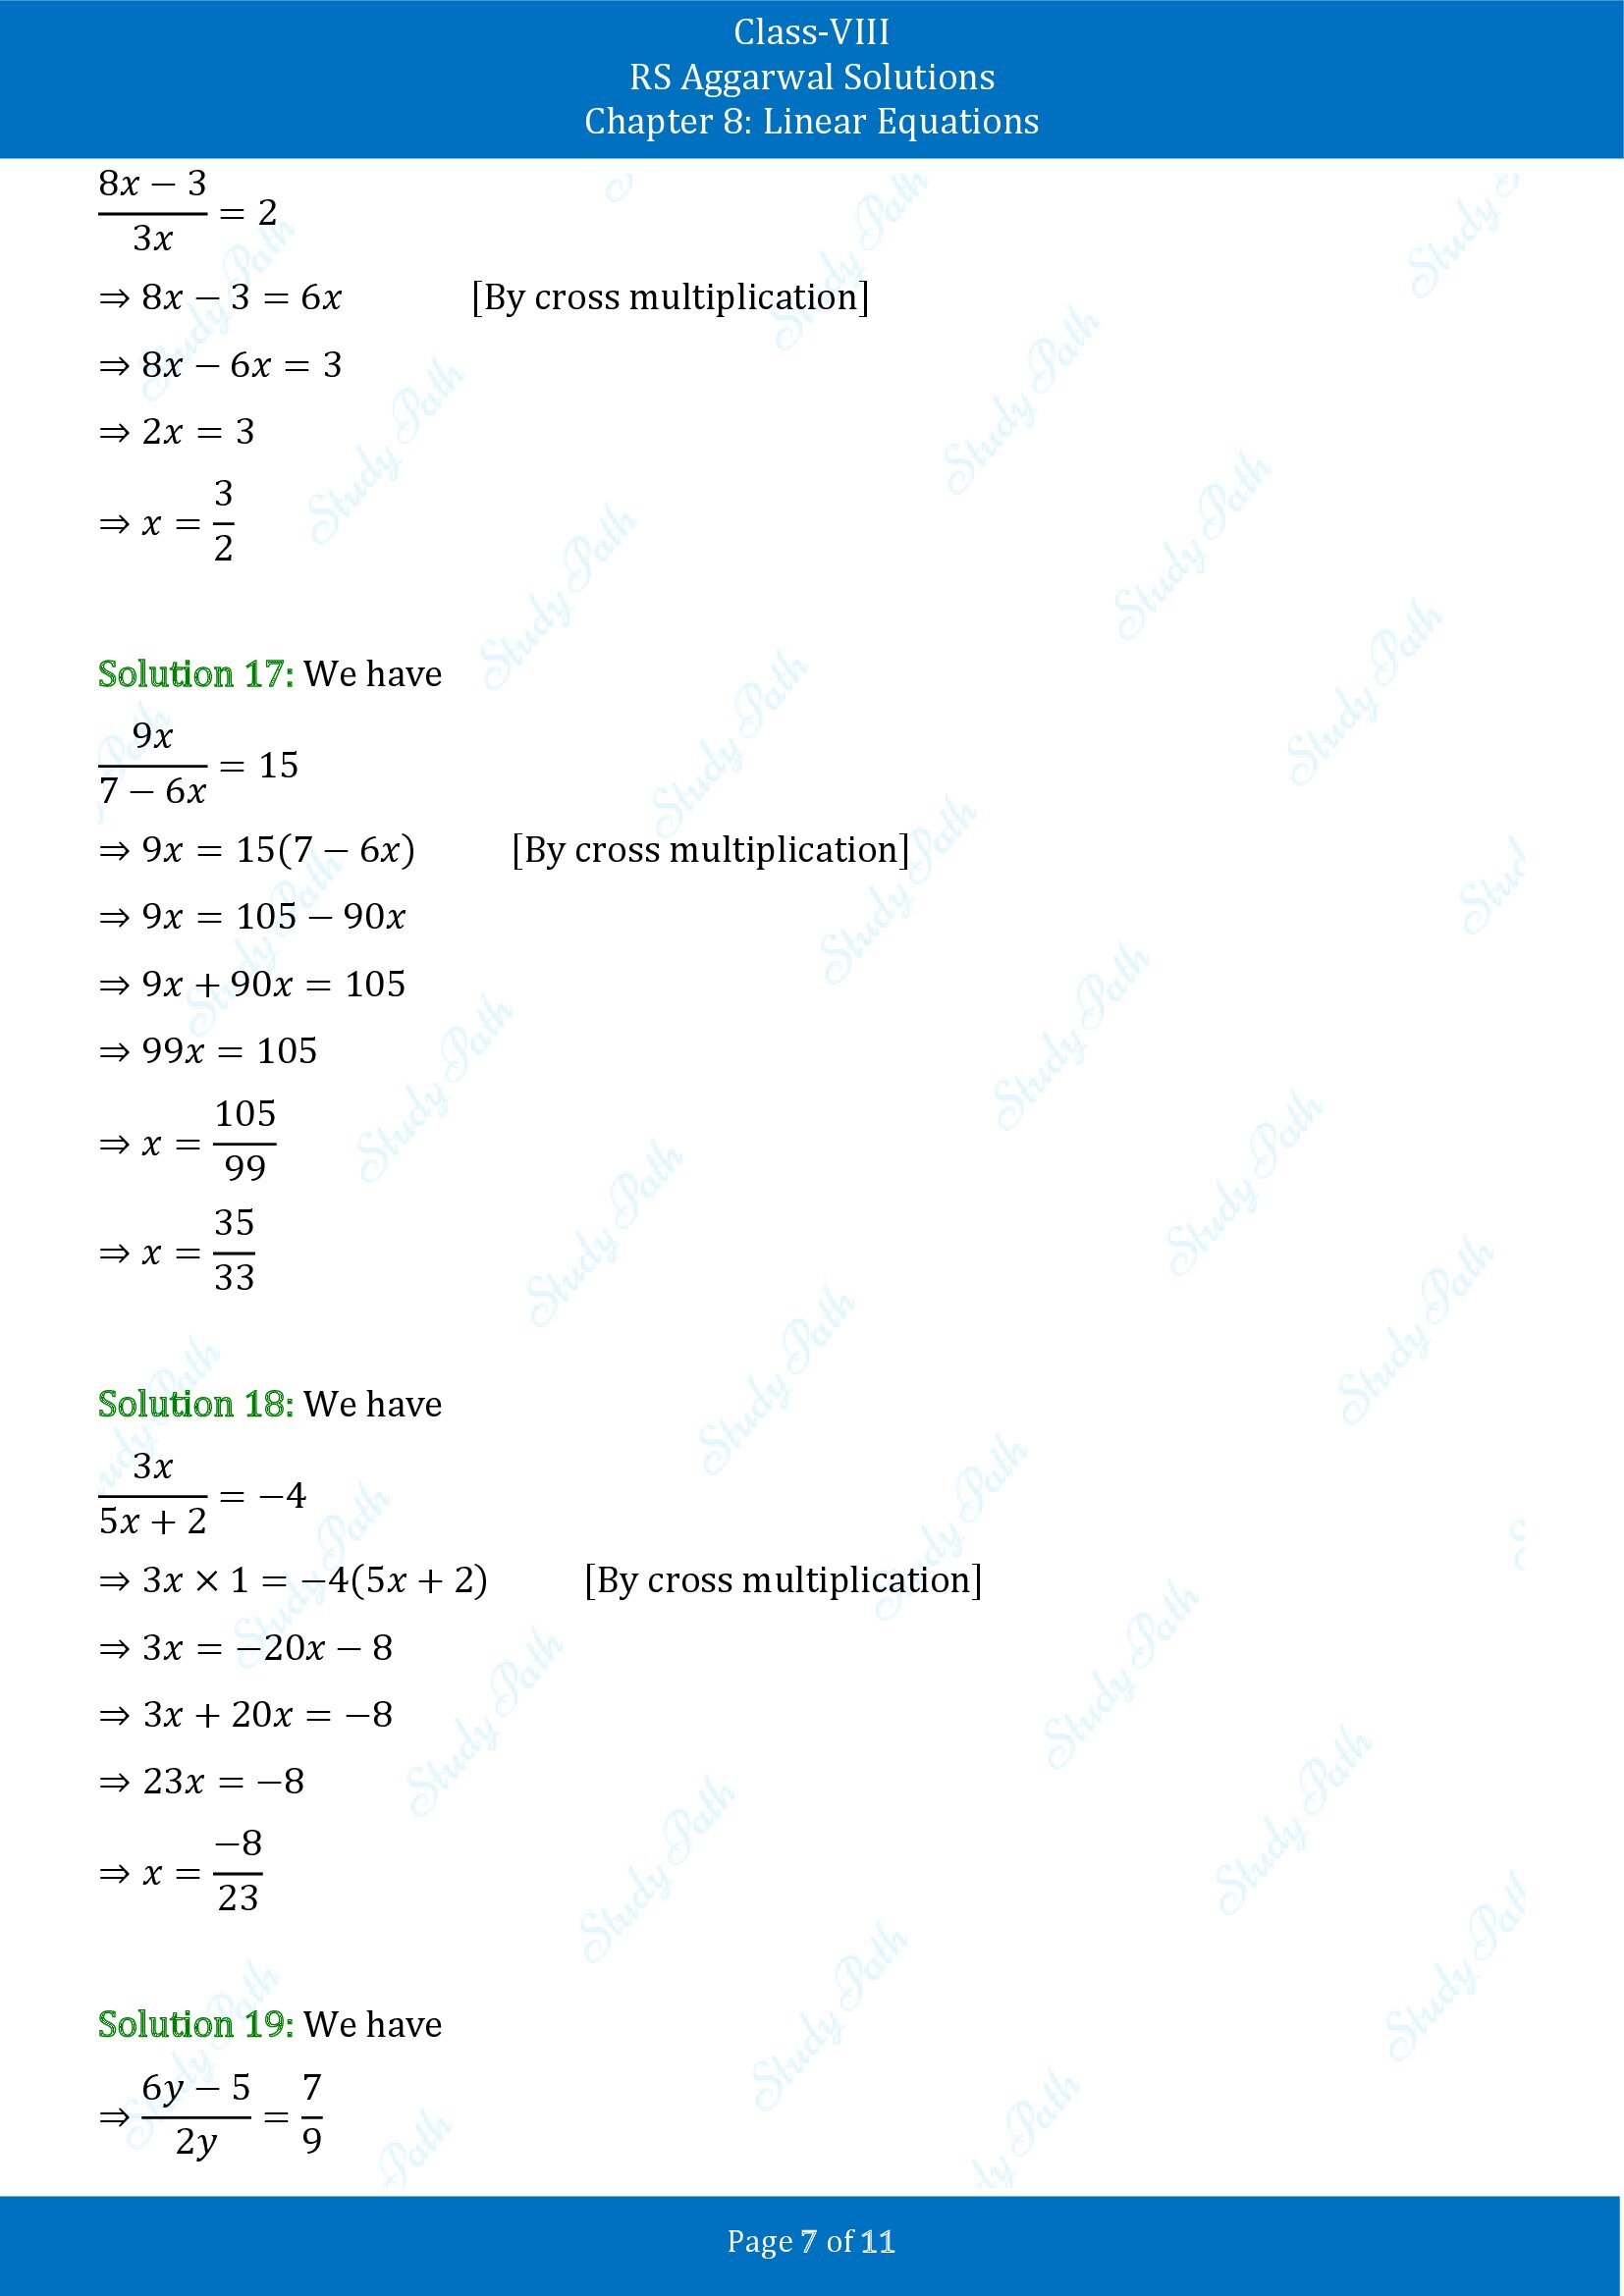 RS Aggarwal Solutions Class 8 Chapter 8 Linear Equations Exercise 8A 00007